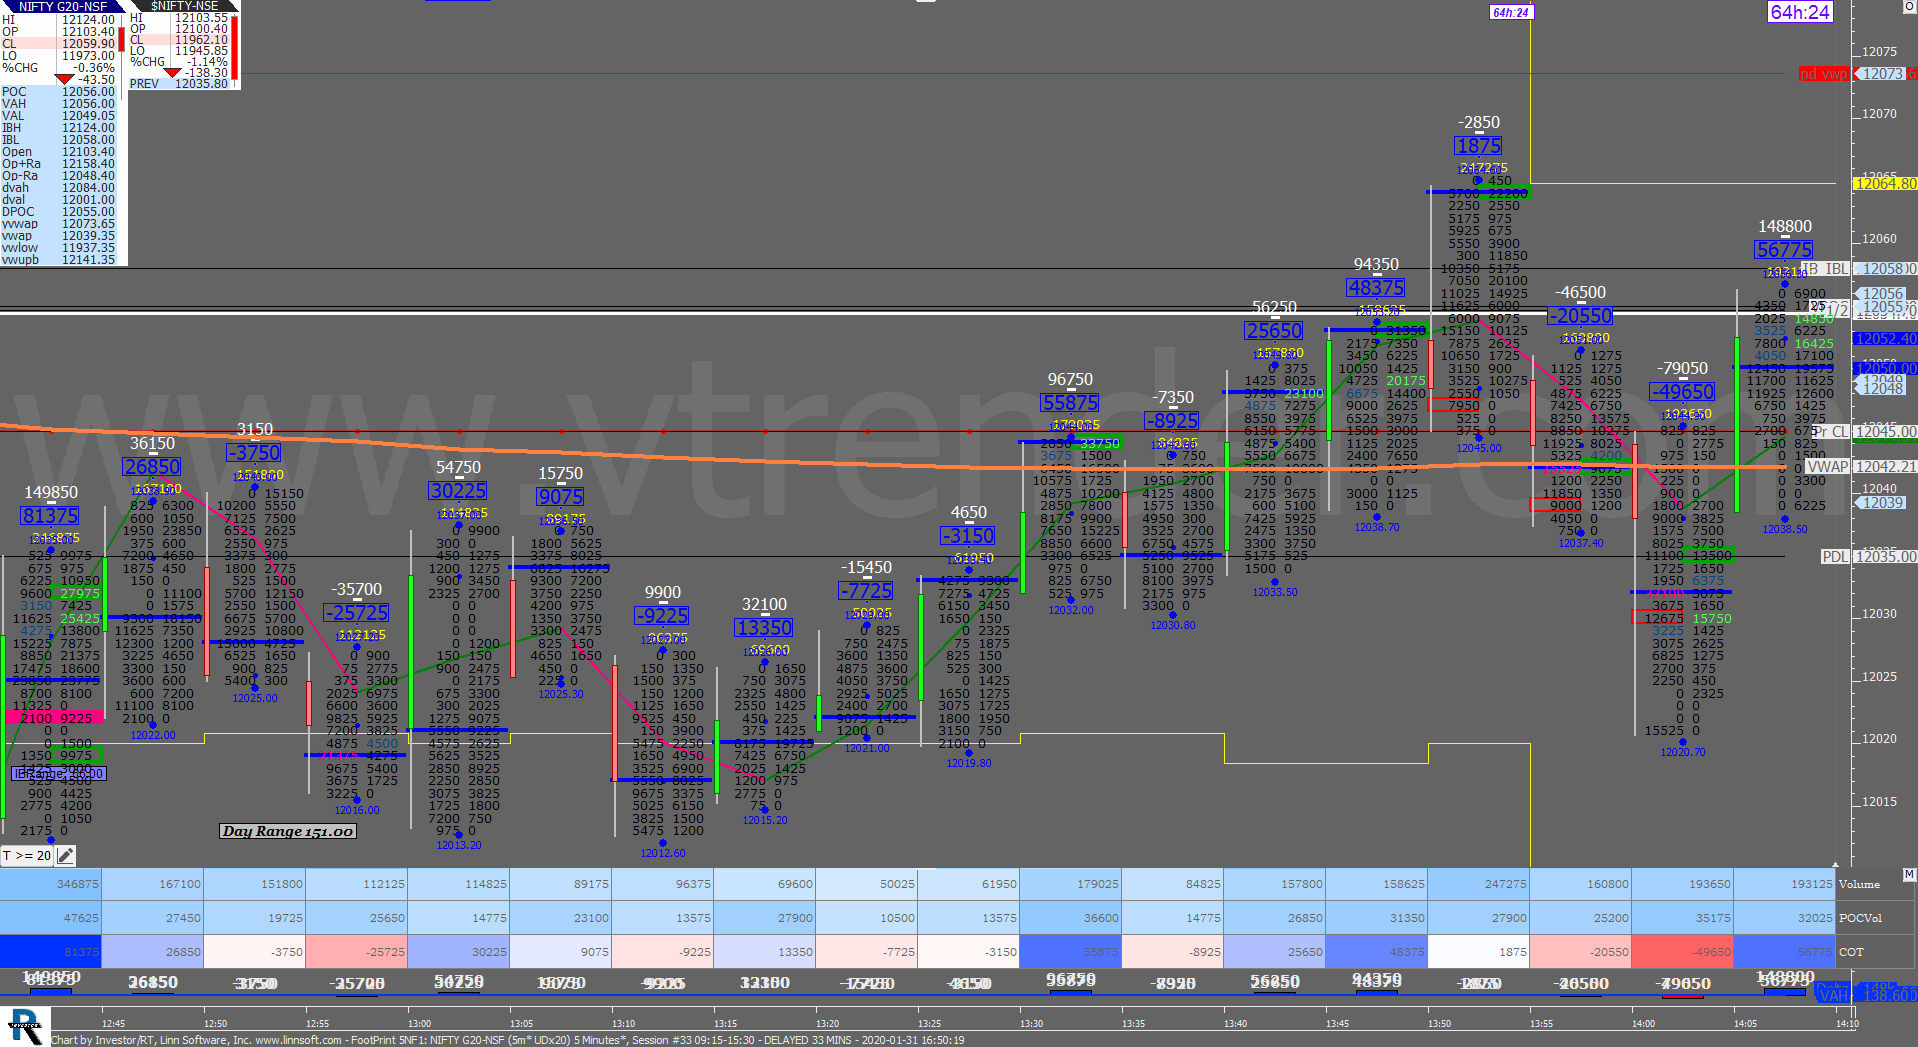 4 40 Order Flow Charts Dated 31St Jan 2020 (5 Mins) Banknifty Futures, Day Trading, Intraday Trading, Intraday Trading Strategies, Nifty Futures, Order Flow Analysis, Support And Resistance, Trading Strategies, Volume Profile Trading